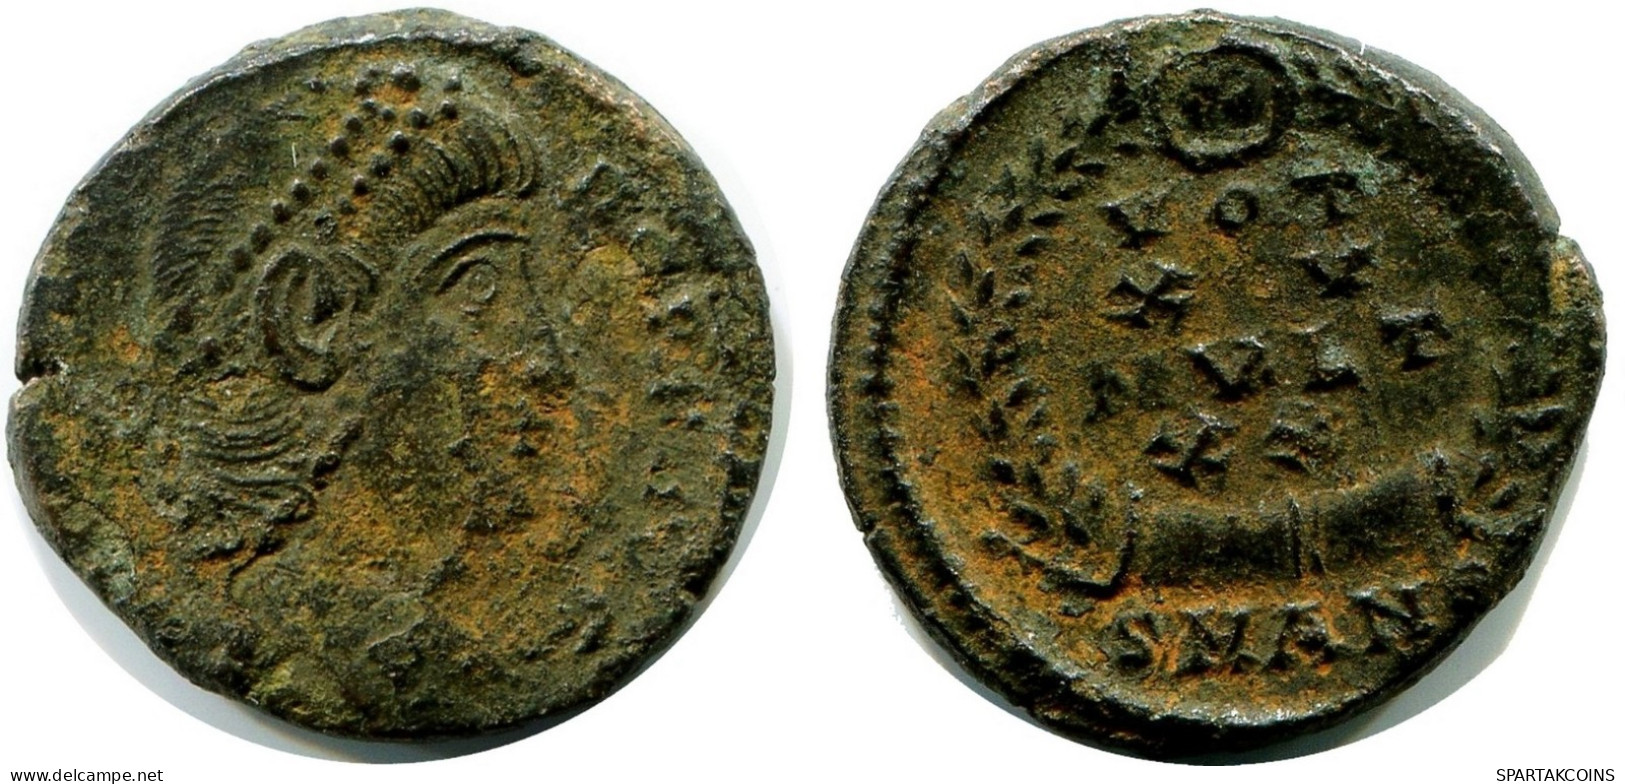 CONSTANS MINTED IN ANTIOCH FROM THE ROYAL ONTARIO MUSEUM #ANC11863.14.U.A - L'Empire Chrétien (307 à 363)